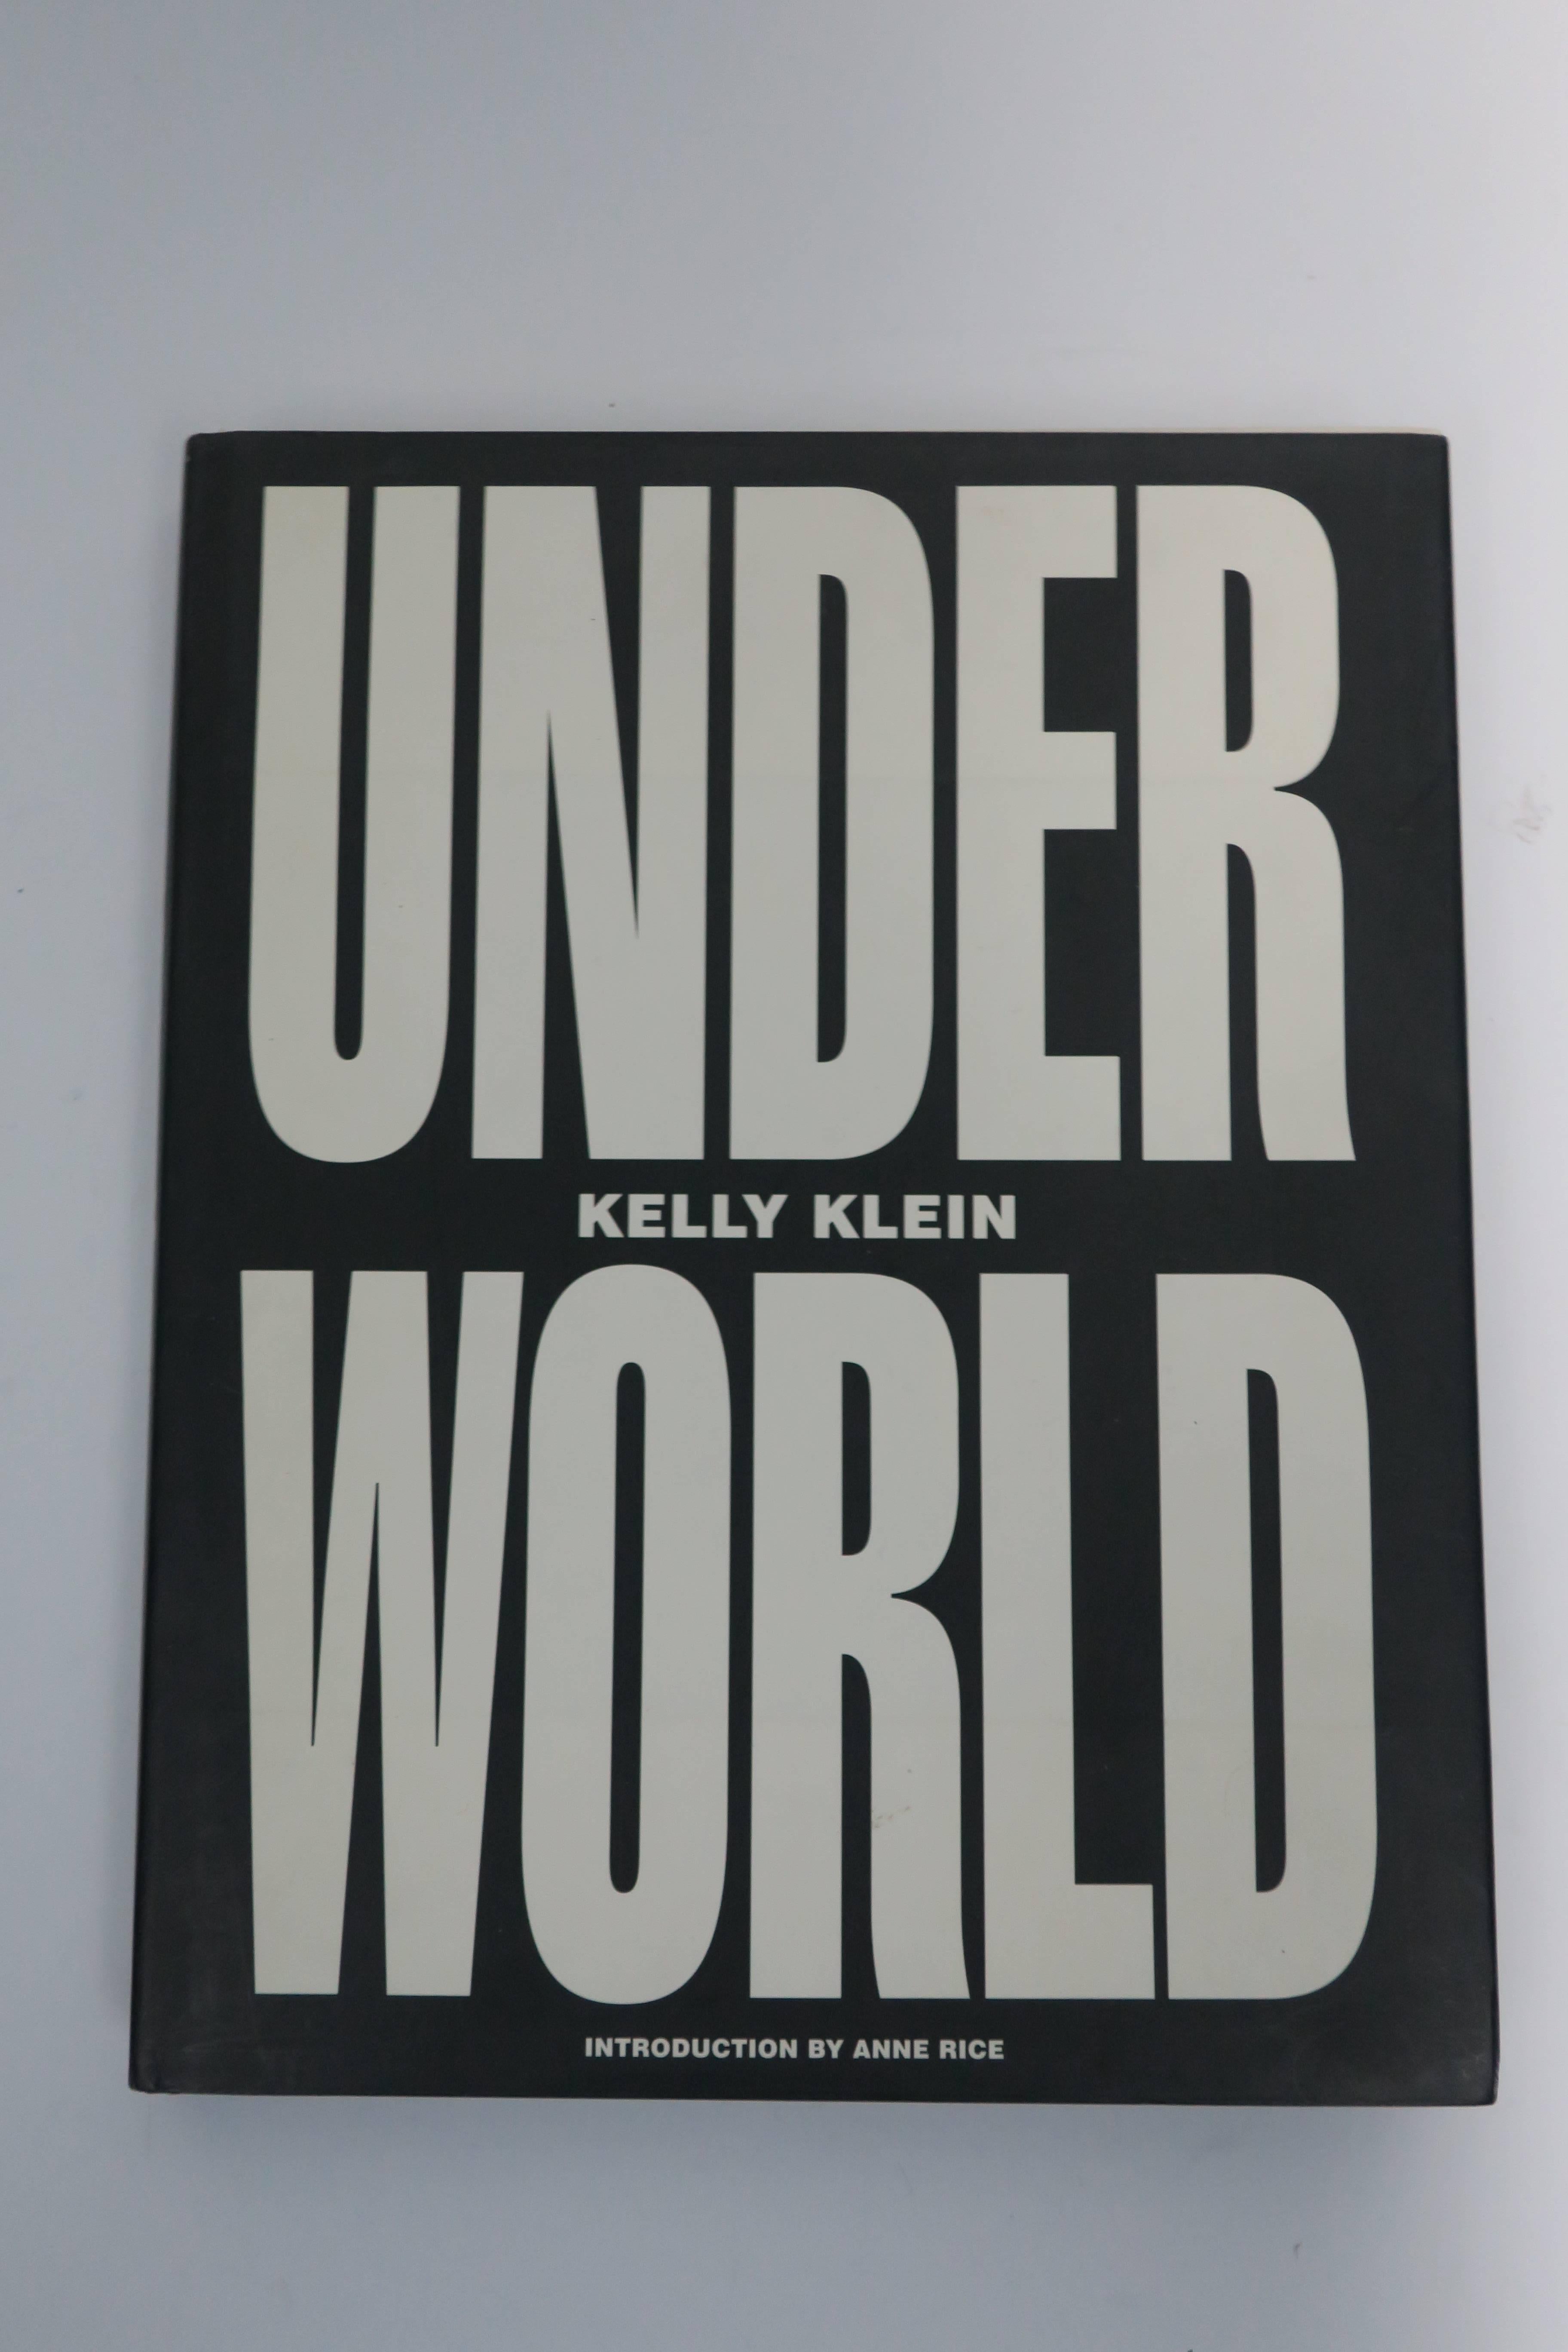 A first edition, 'Under World', coffee table book by Kelly Klein, circa 1995. 